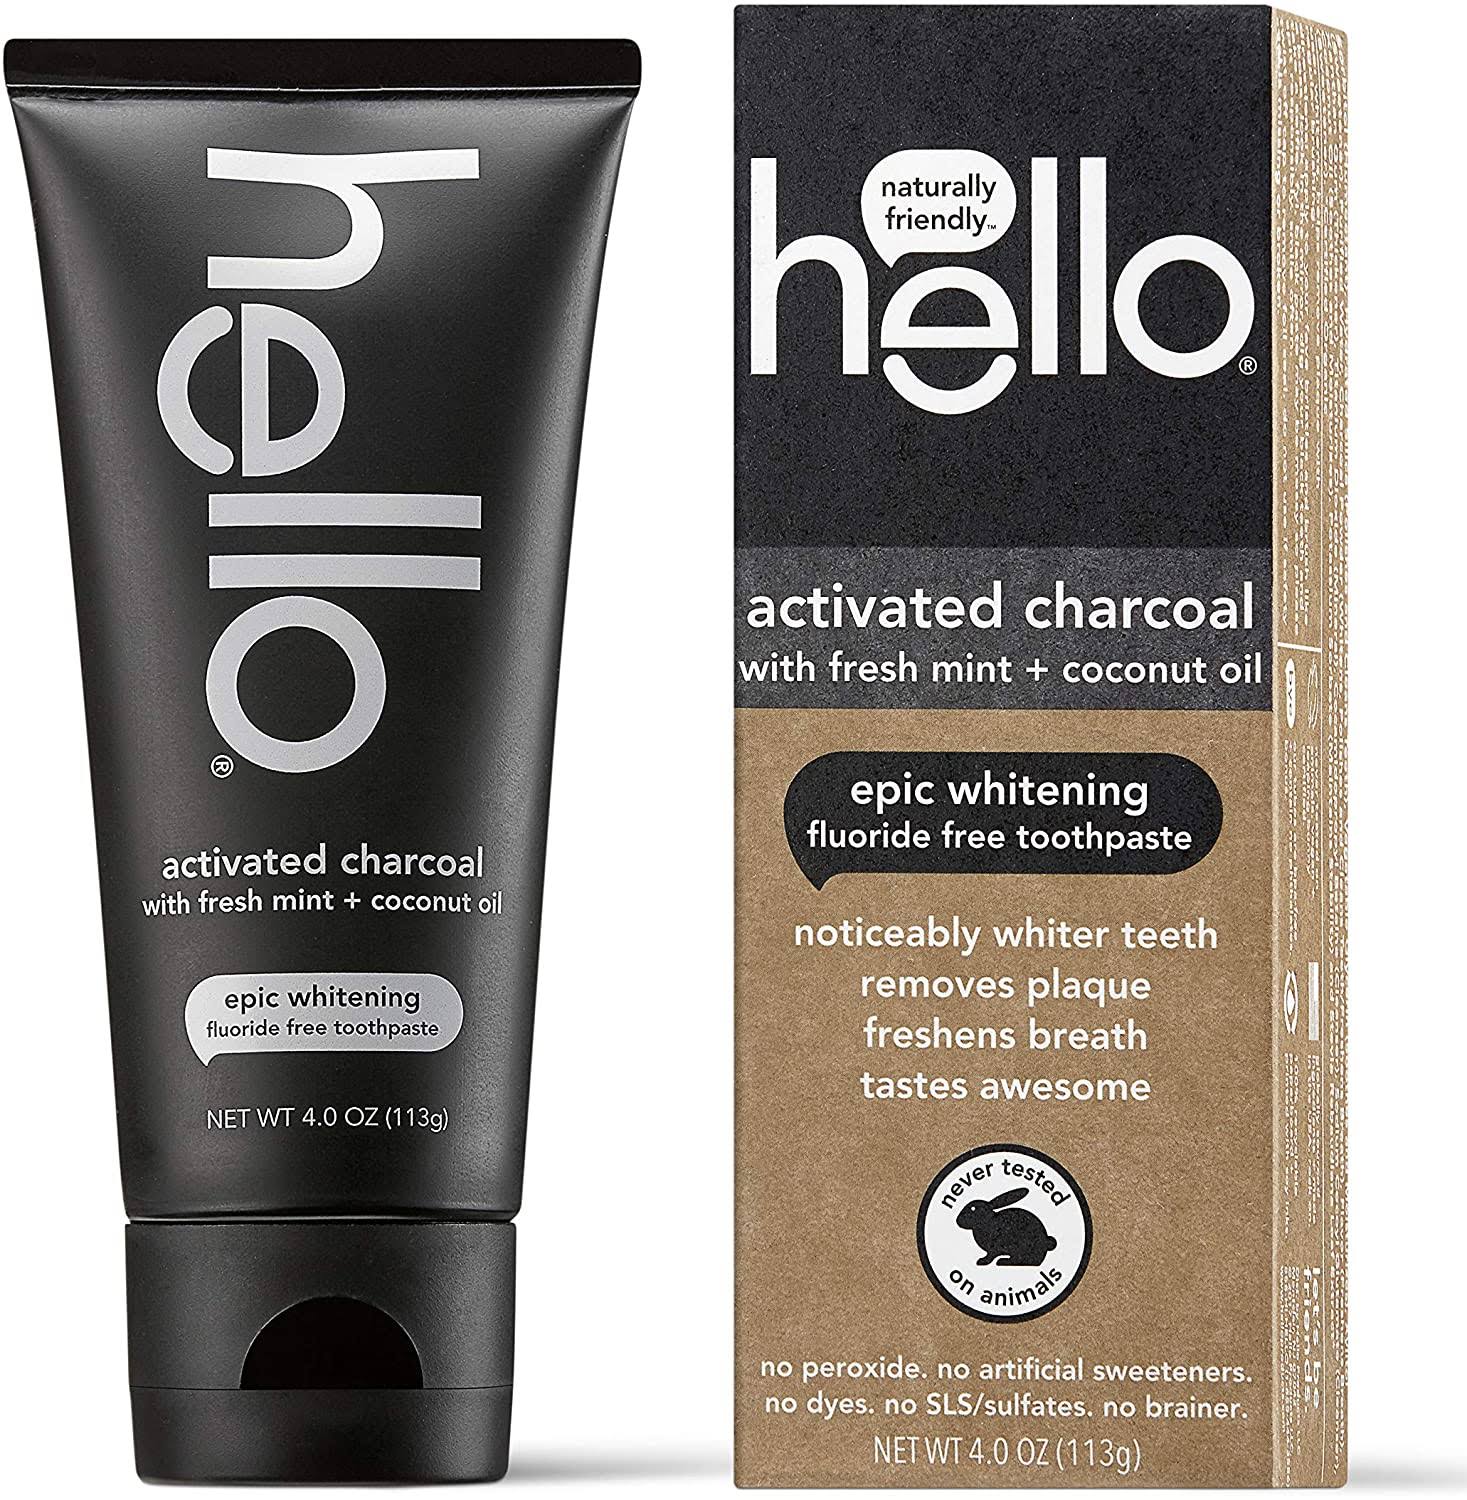 Hello Oral Care Activated Charcoal Teeth Whitening Fluoride Free And SLS Free Toothpaste, 1 Count